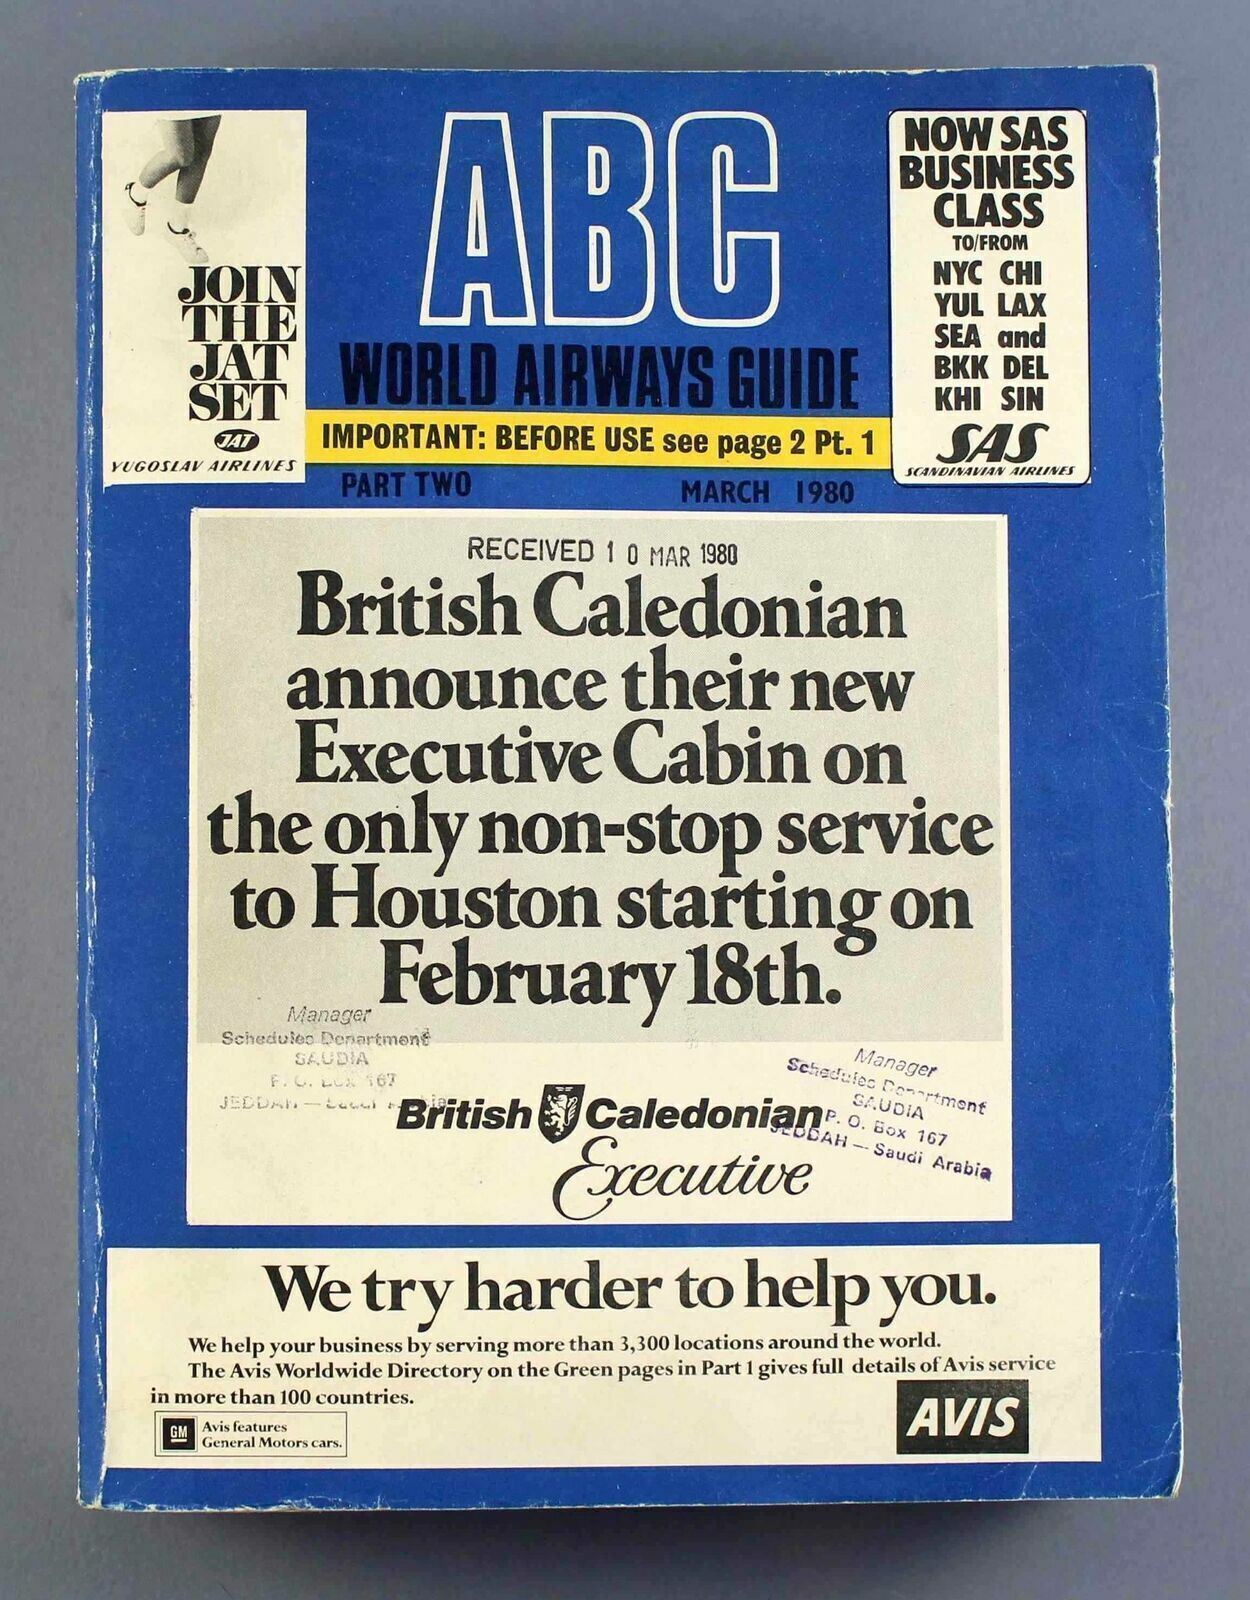 ABC WORLD AIRWAYS GUIDE MARCH 1980 AIRLINE TIMETABLE PART TWO BLUE BOOK BCAL JAT